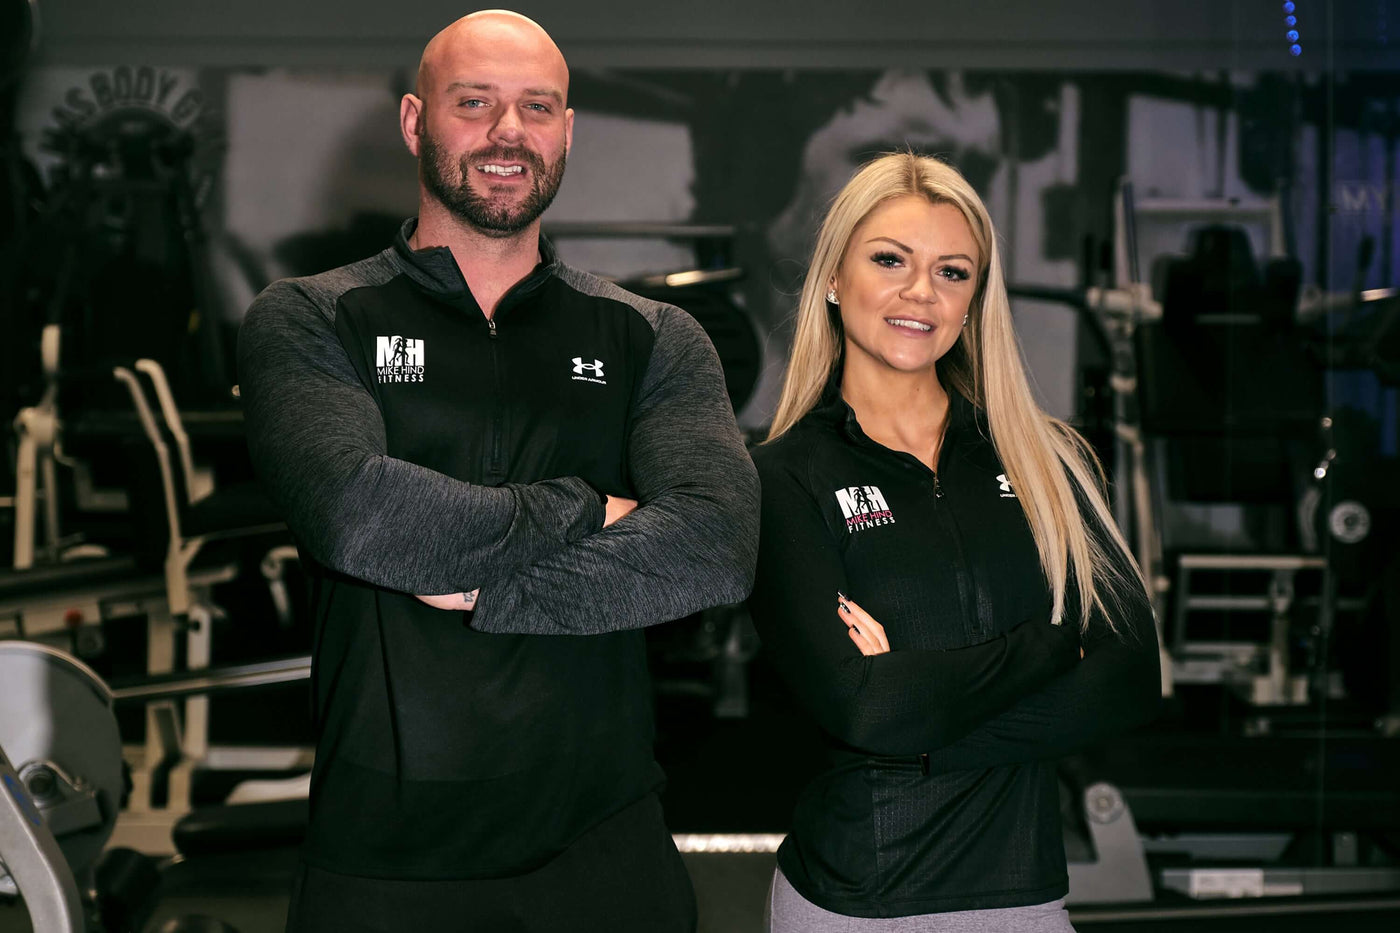 Coaches Mike Hind MBE and Ashleigh Sives Jackson posing at Mas Body Gym Middlesbrough